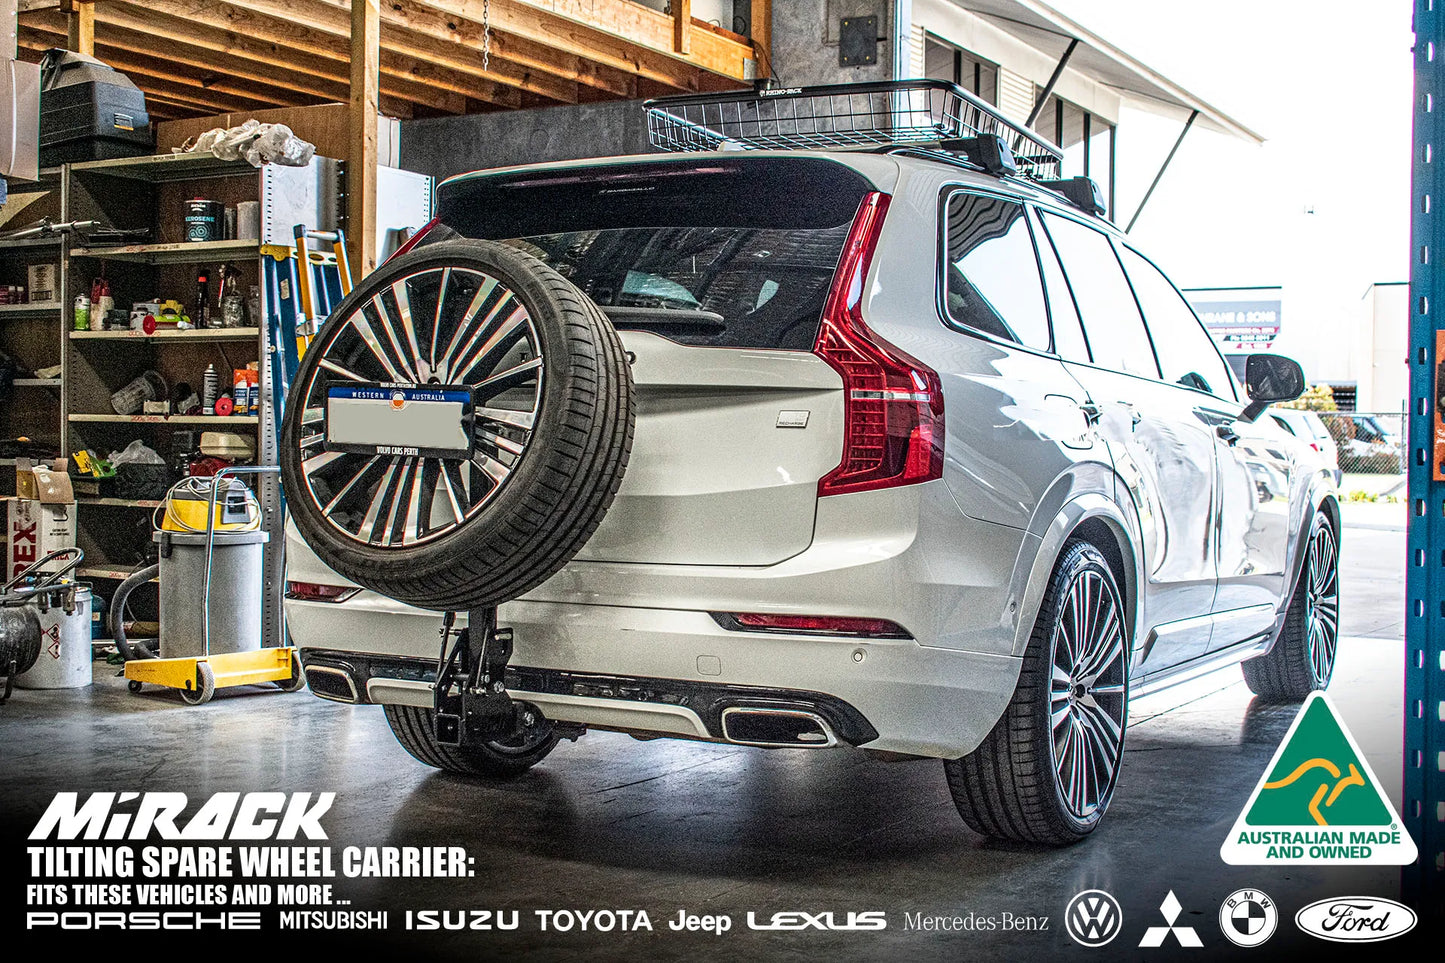 XC60's full potential: Tilting spare wheel carrier maximizes space & off-roading (tow hitch mount).